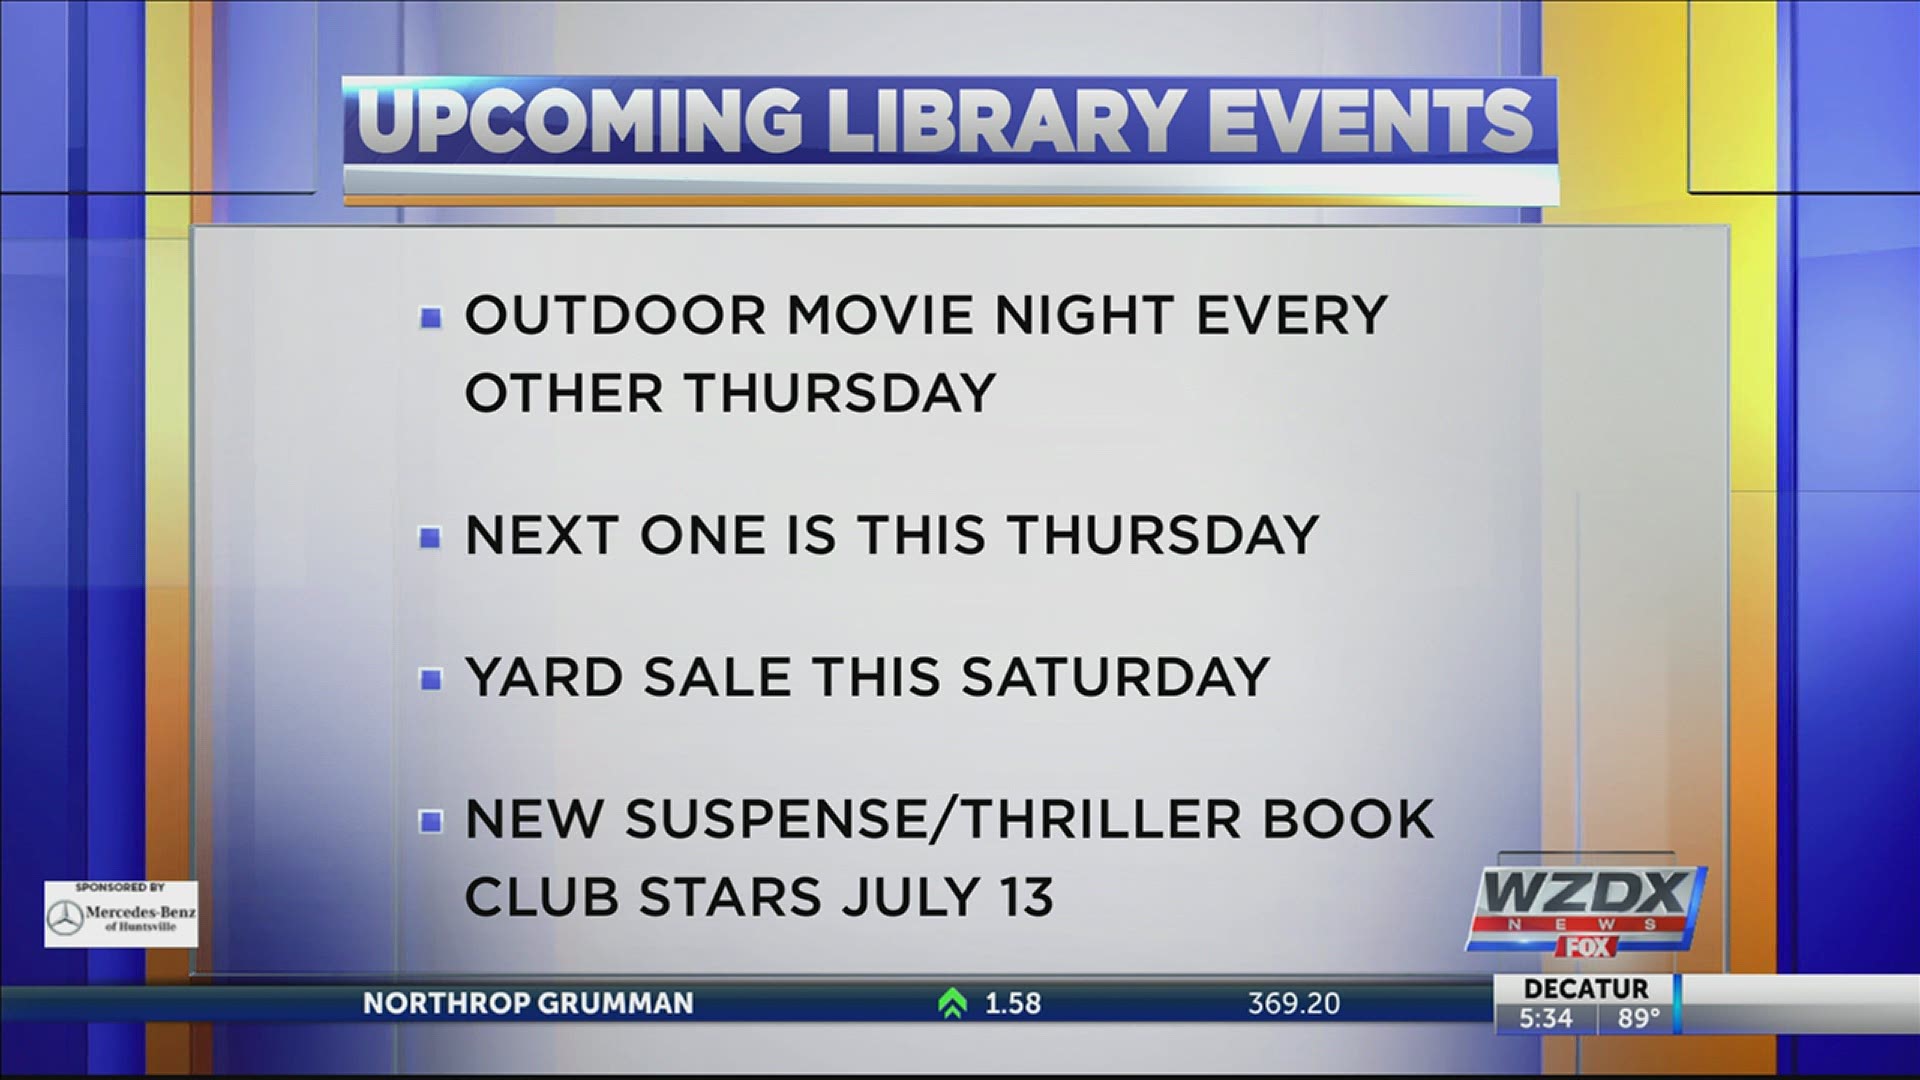 Huntsville-Madison County Public Library has a lot in store for the community this summer: from new book clubs to yard sales, there is something for everyone!